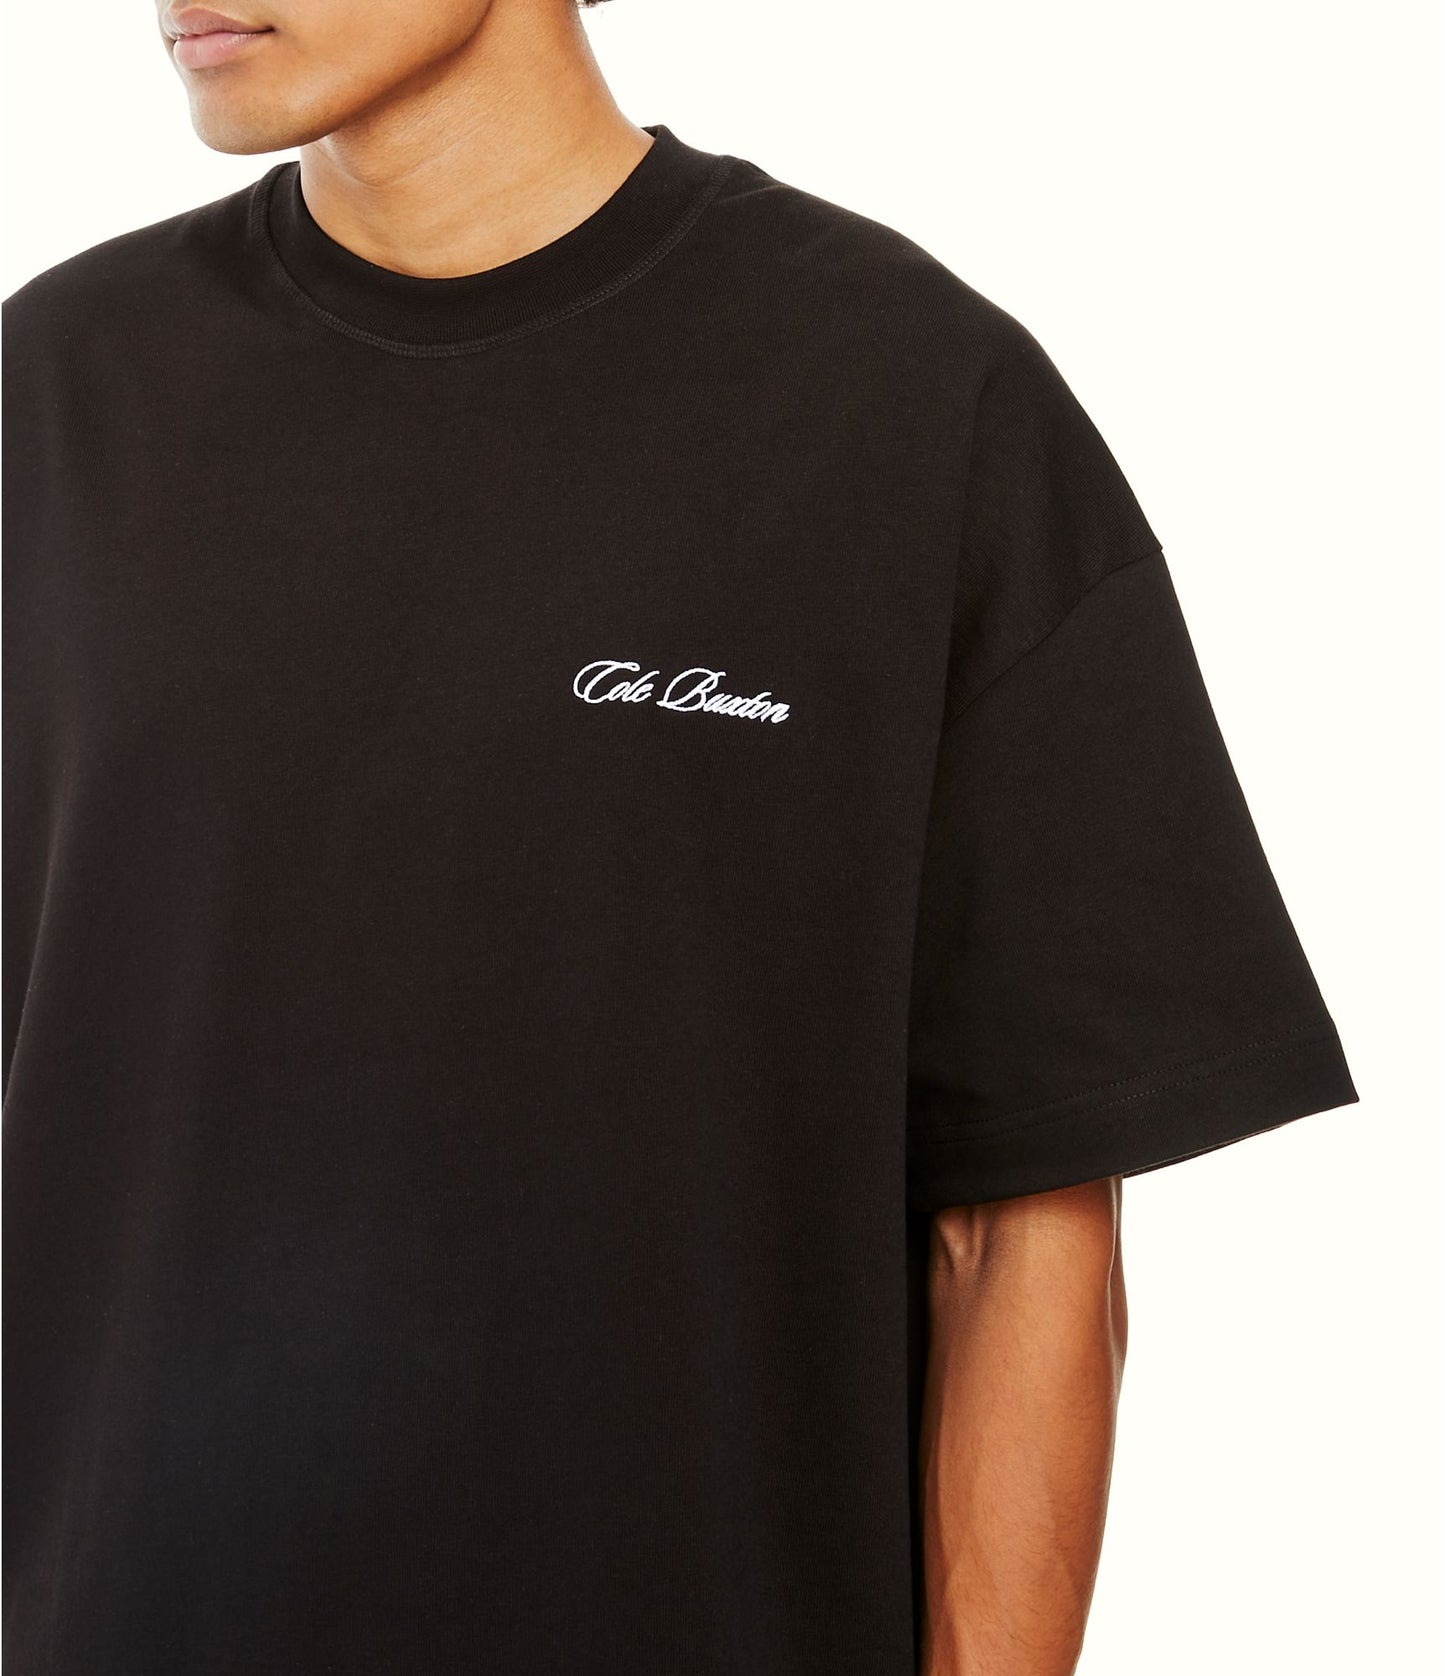 CB CLASSIC EMBROIDERY T-SHIRT